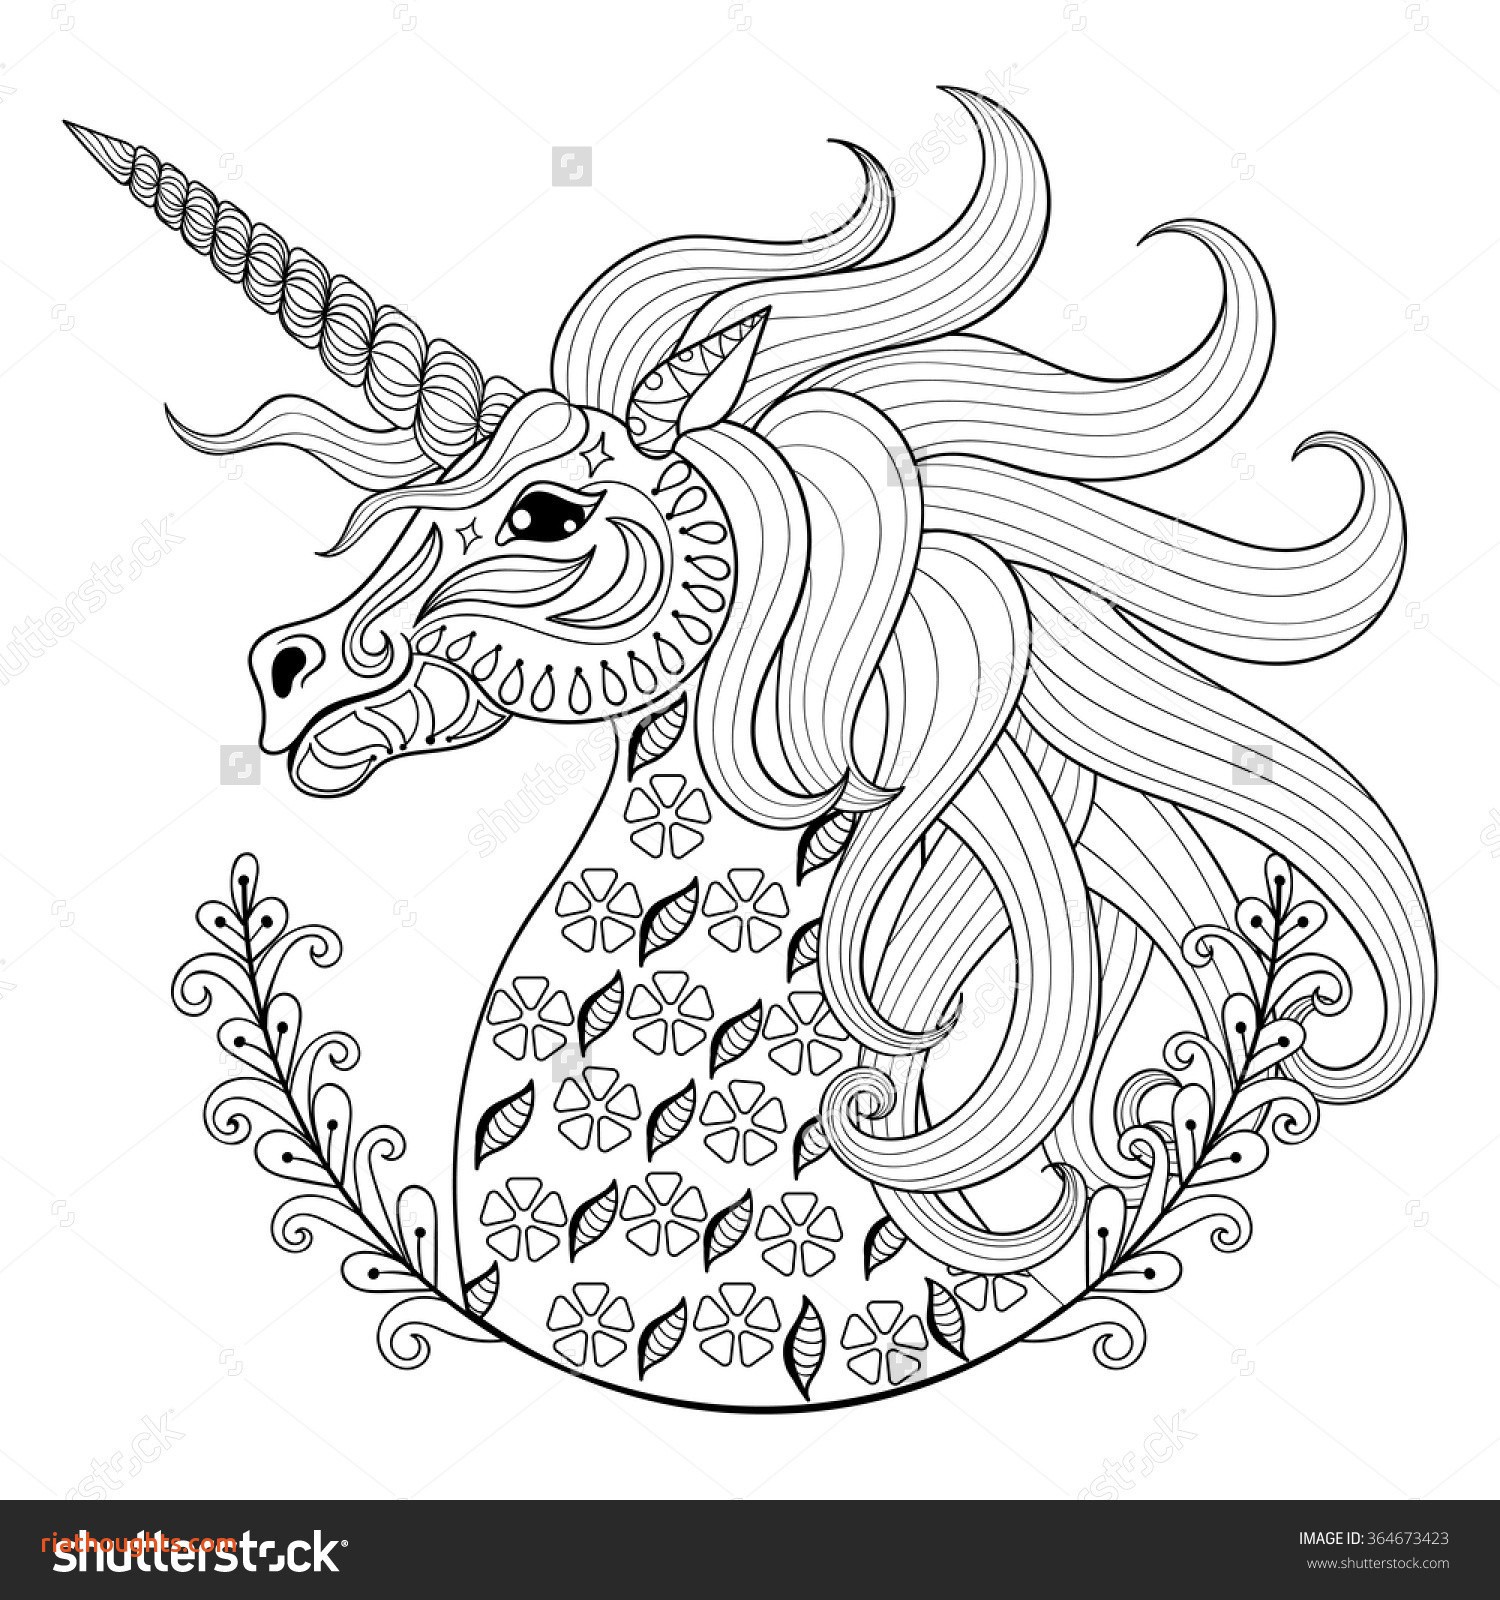 Unicorn Coloring Page for Adults